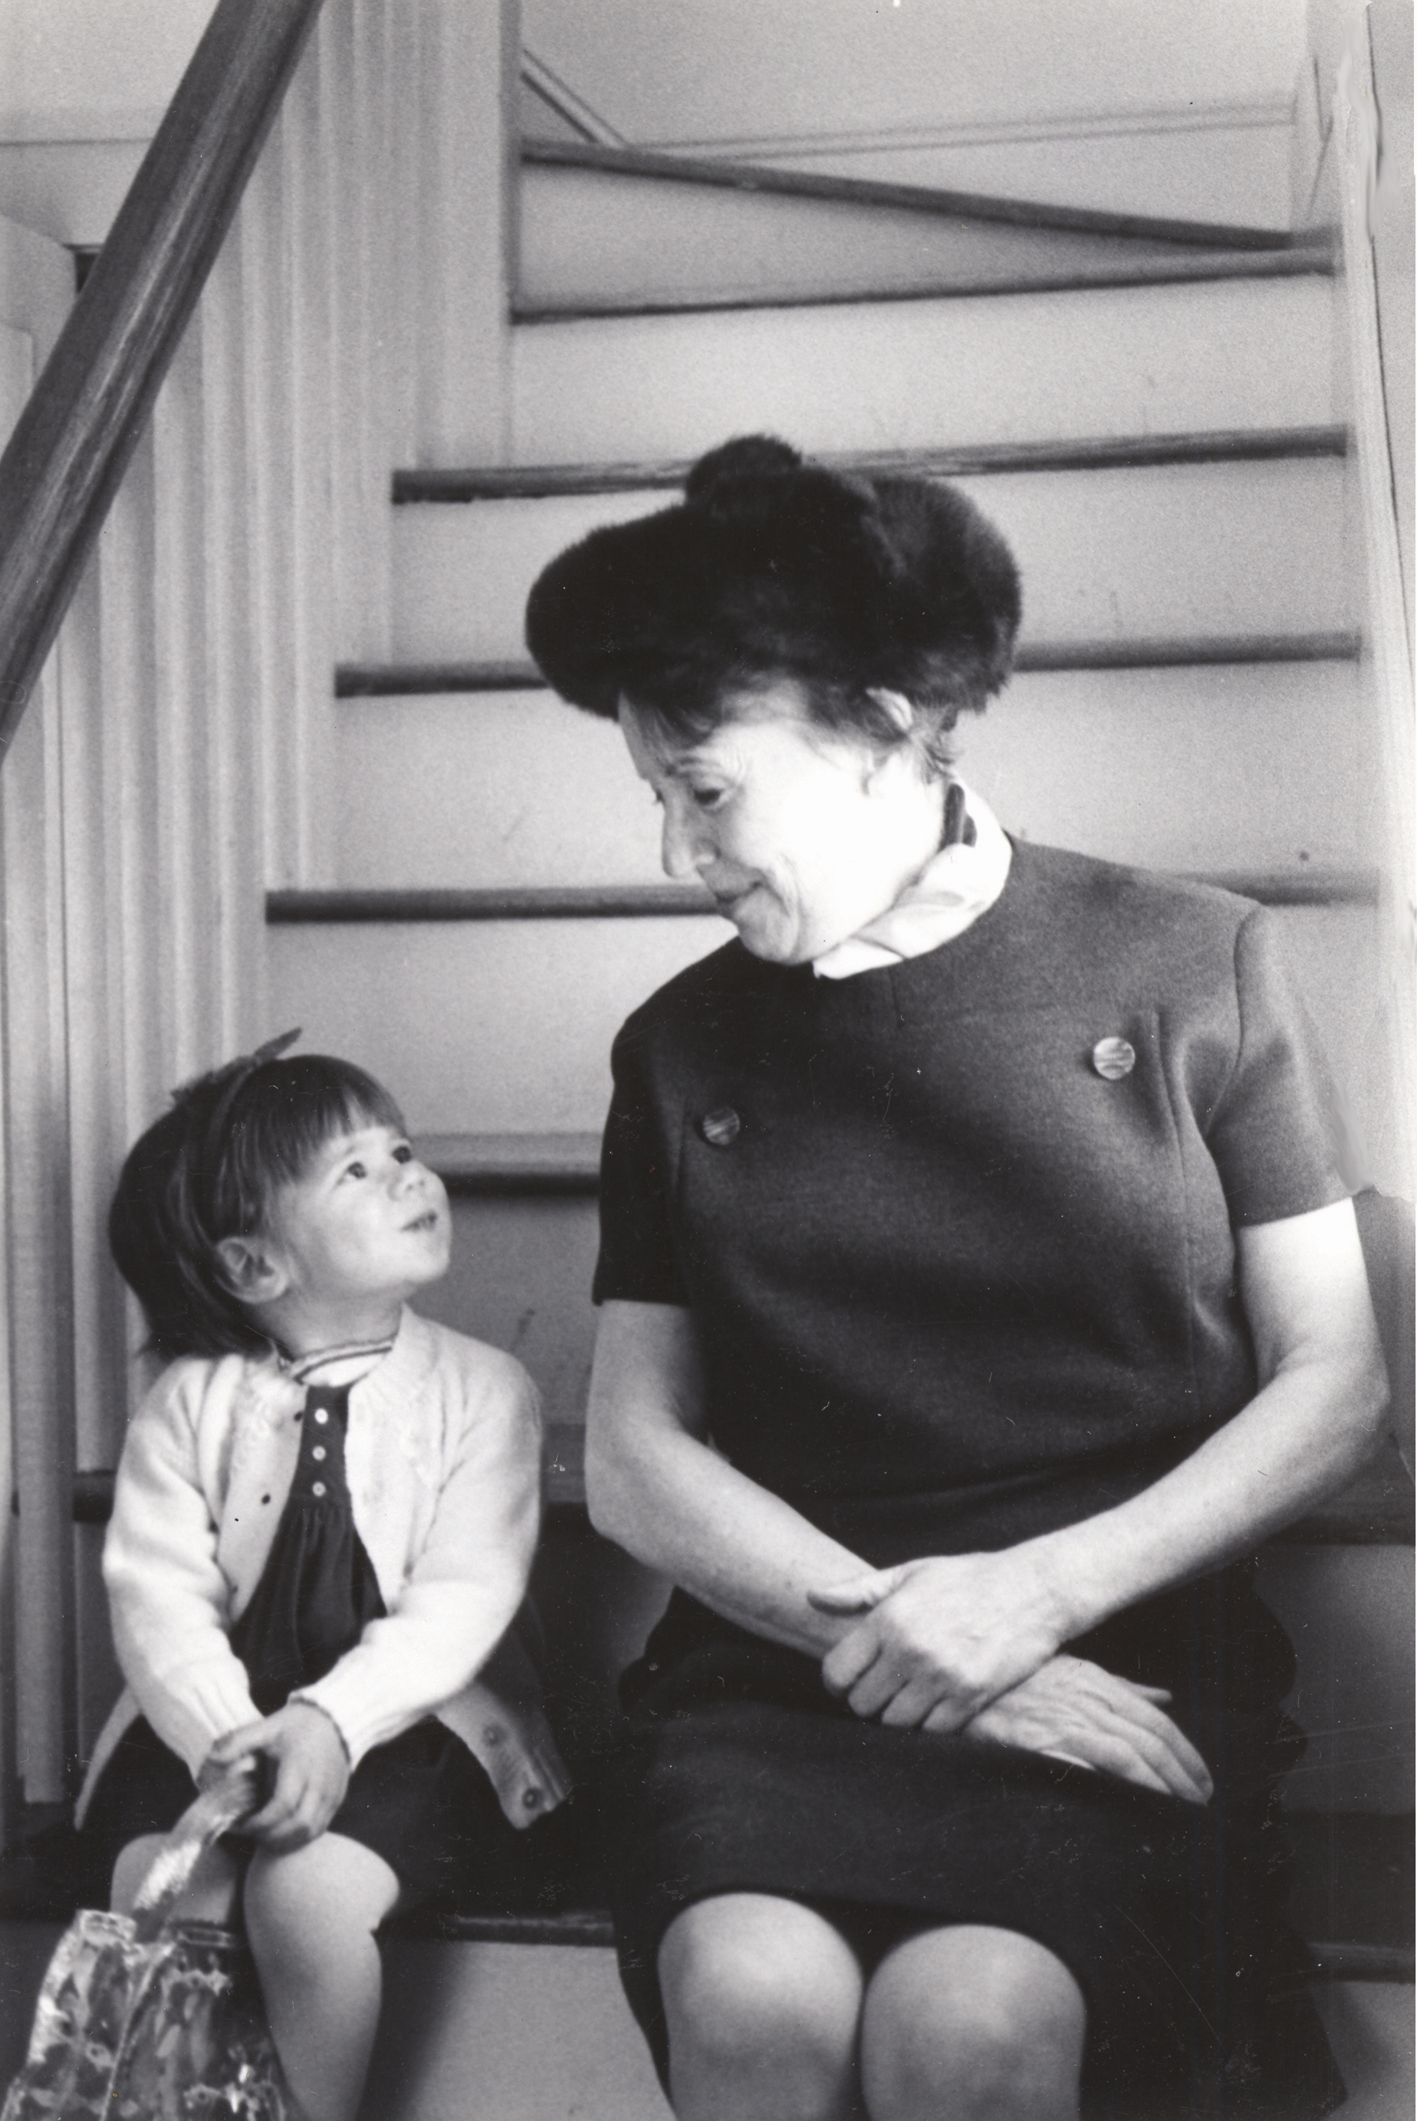 A small child sits next to her grandmother on the stairs in an old black and white photo. 